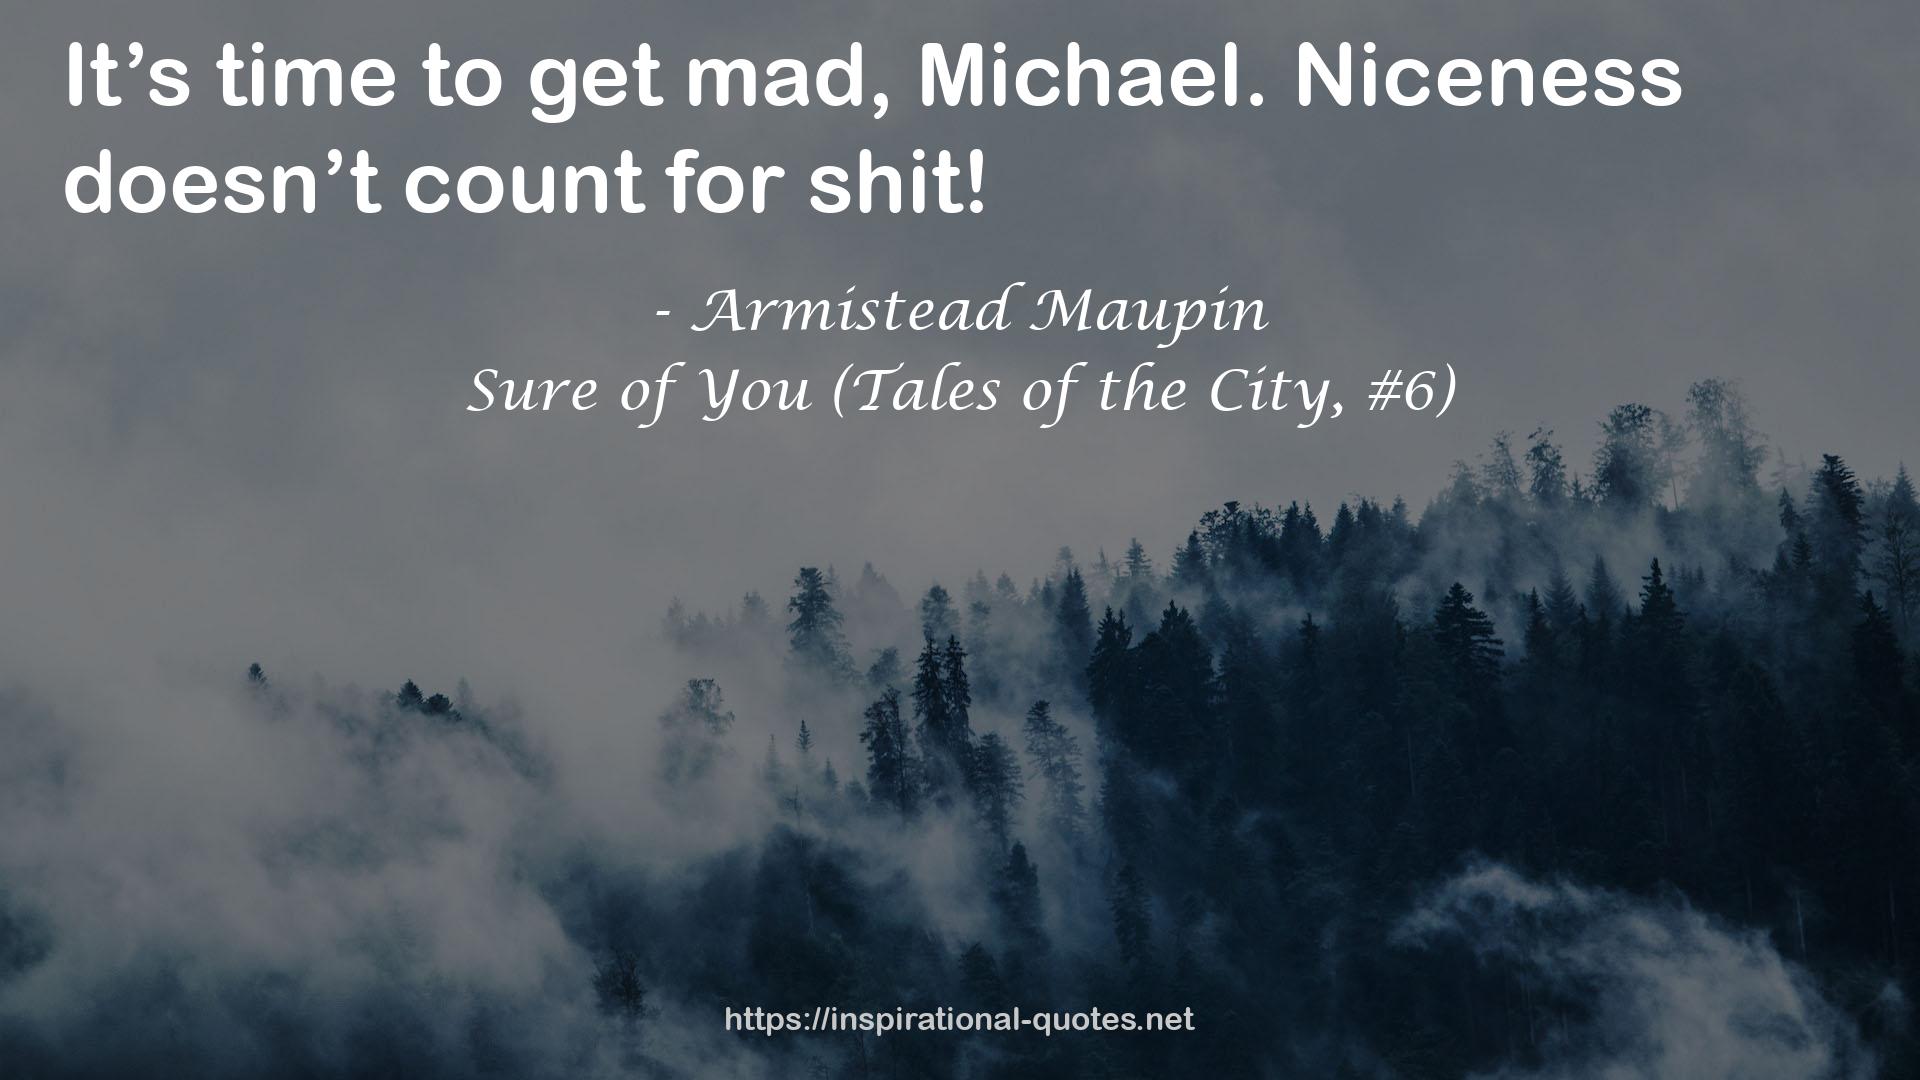 Sure of You (Tales of the City, #6) QUOTES